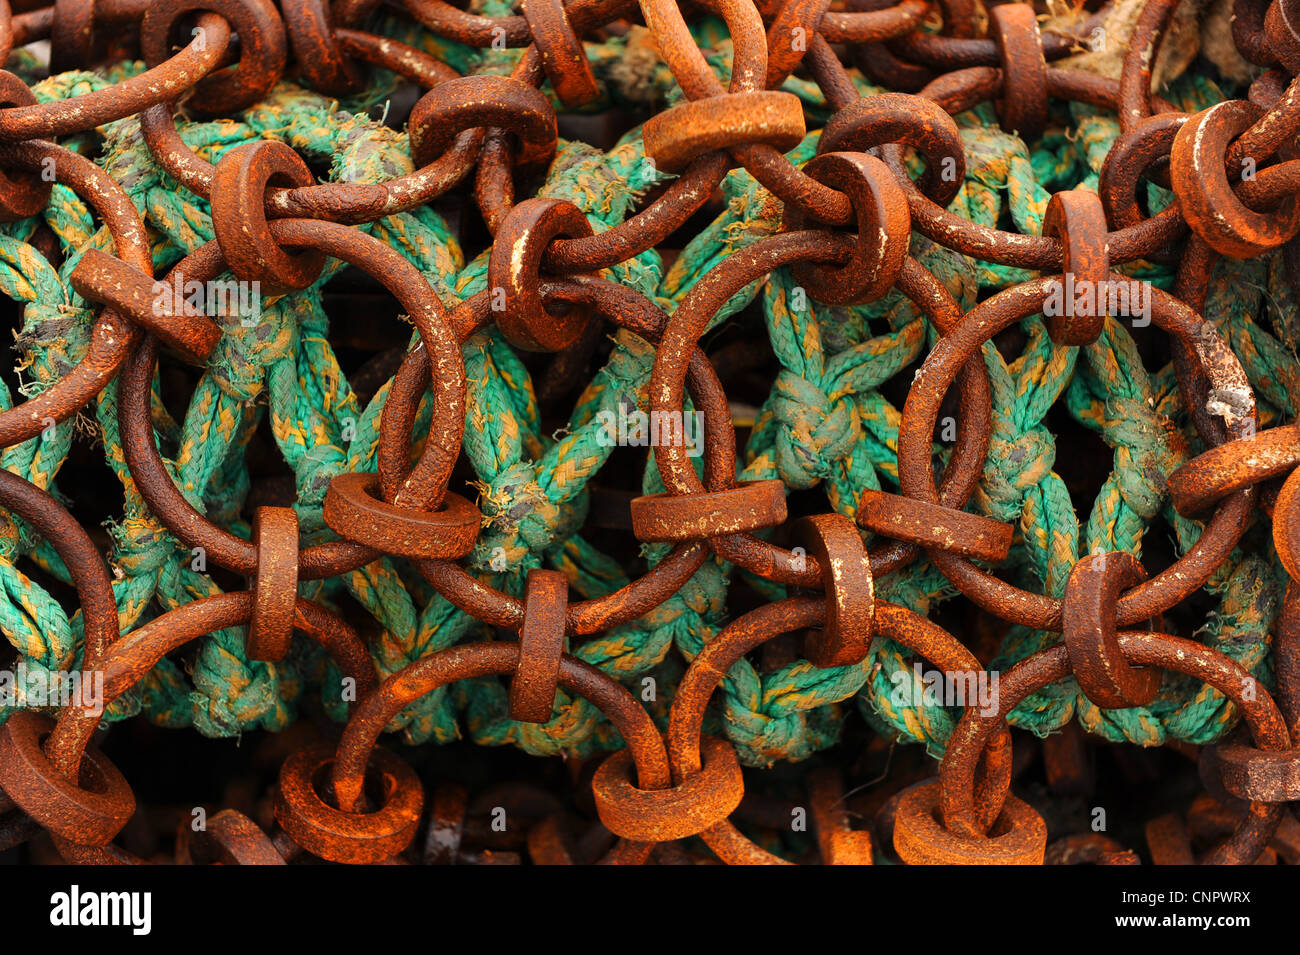 Chain links and ropes on scallop dredger boat fishing nets Stock Photo